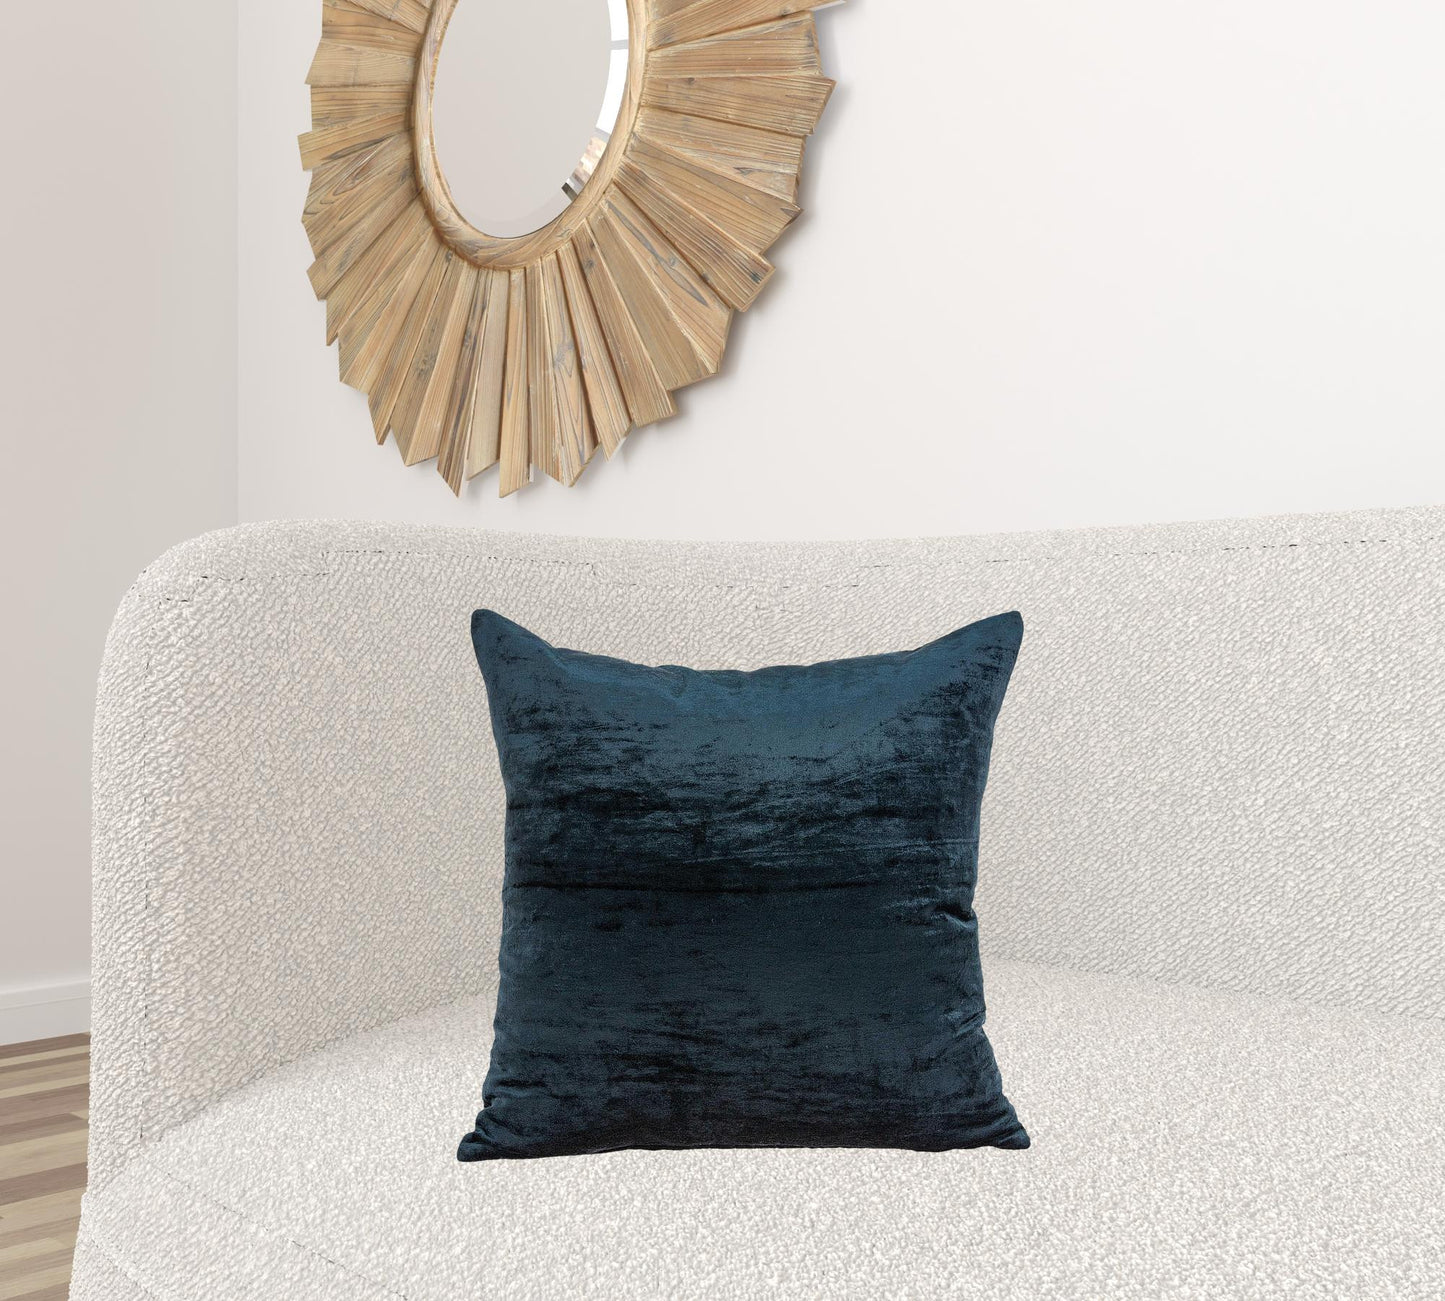 20" X 7" X 20" Transitional Dark Blue Solid Pillow Cover With Poly Insert